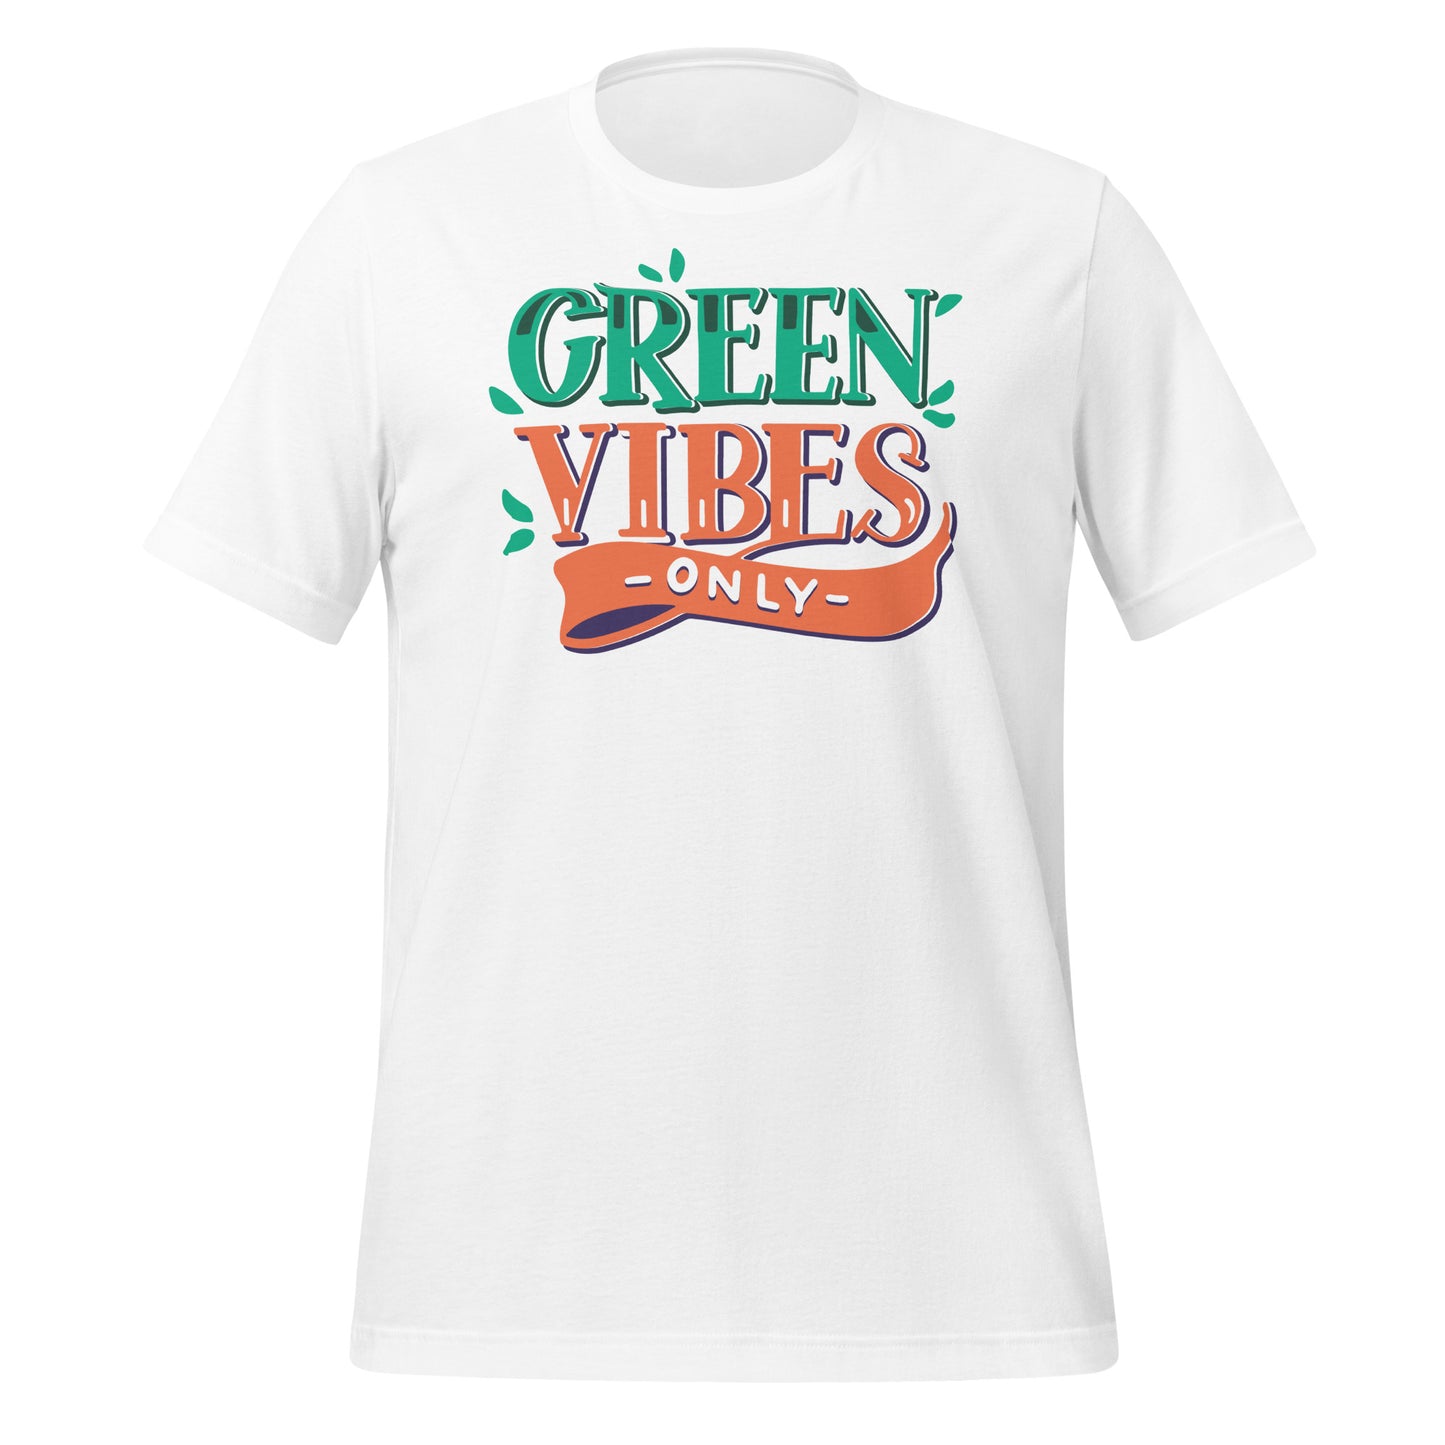 Green Vibes Only T-Shirt: Eco-Friendly Fashion Statement